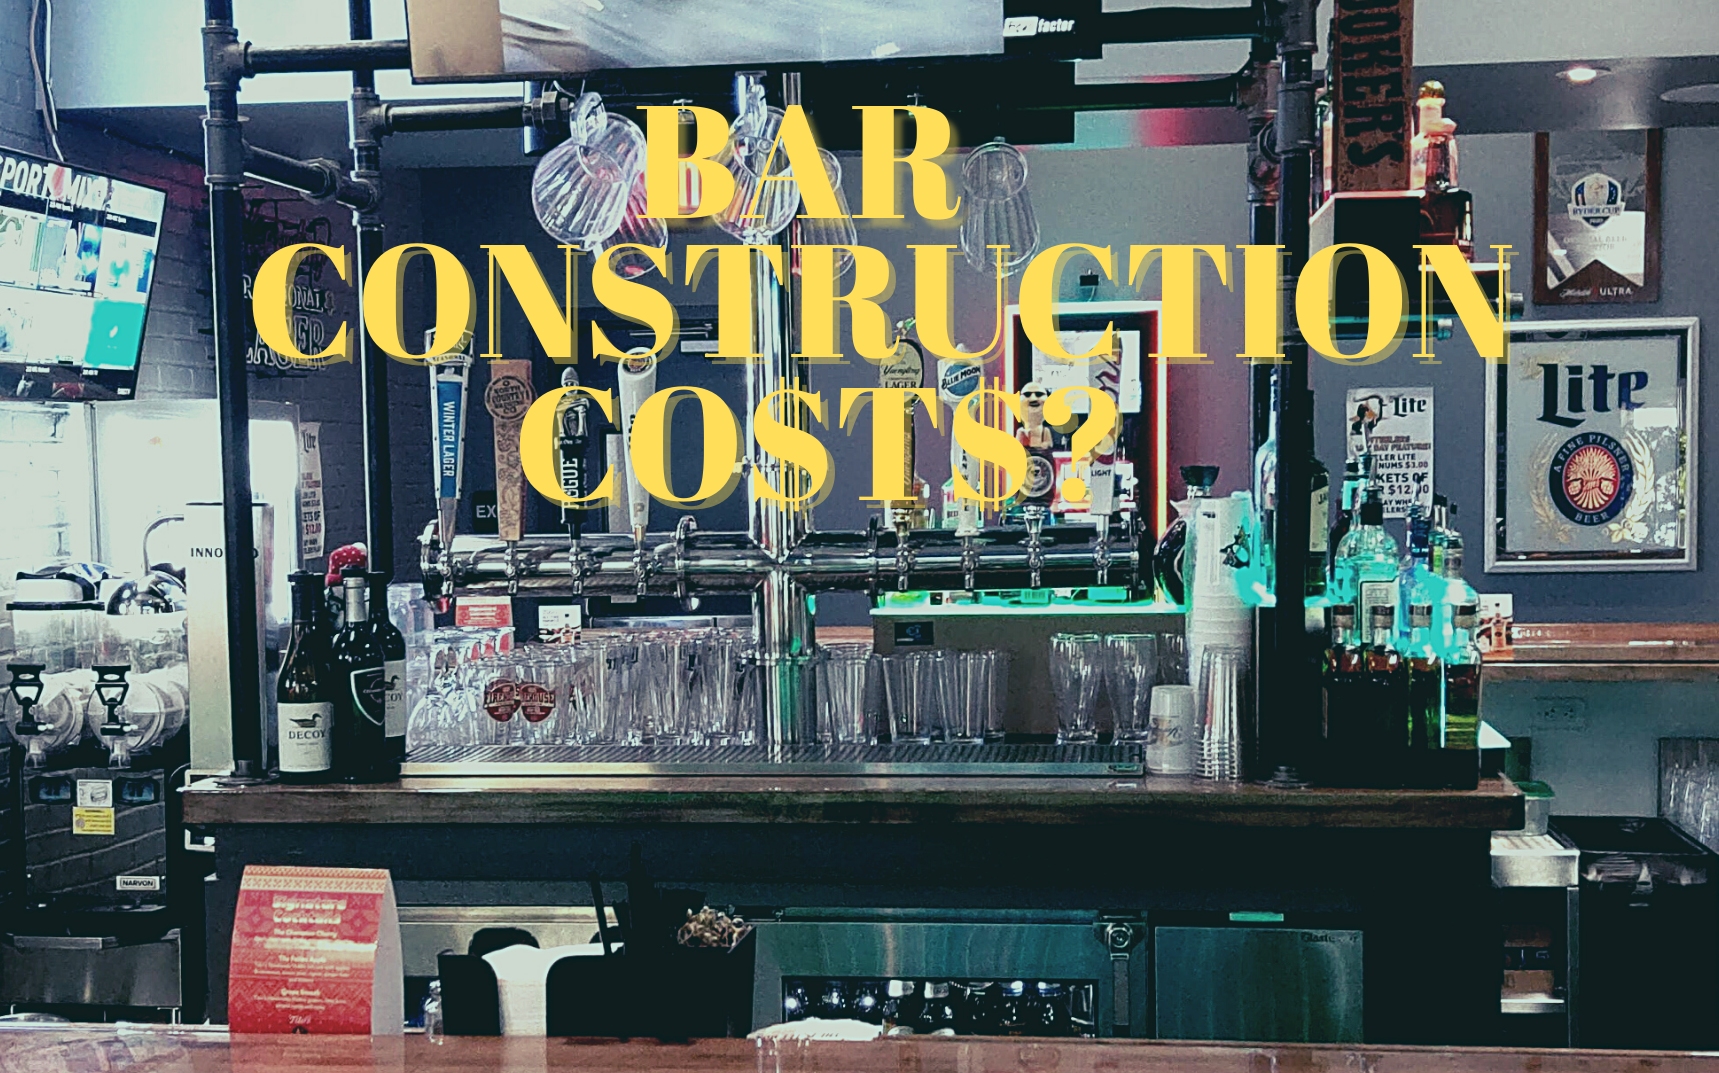 Bar architecture and design by Cabaret Design Group